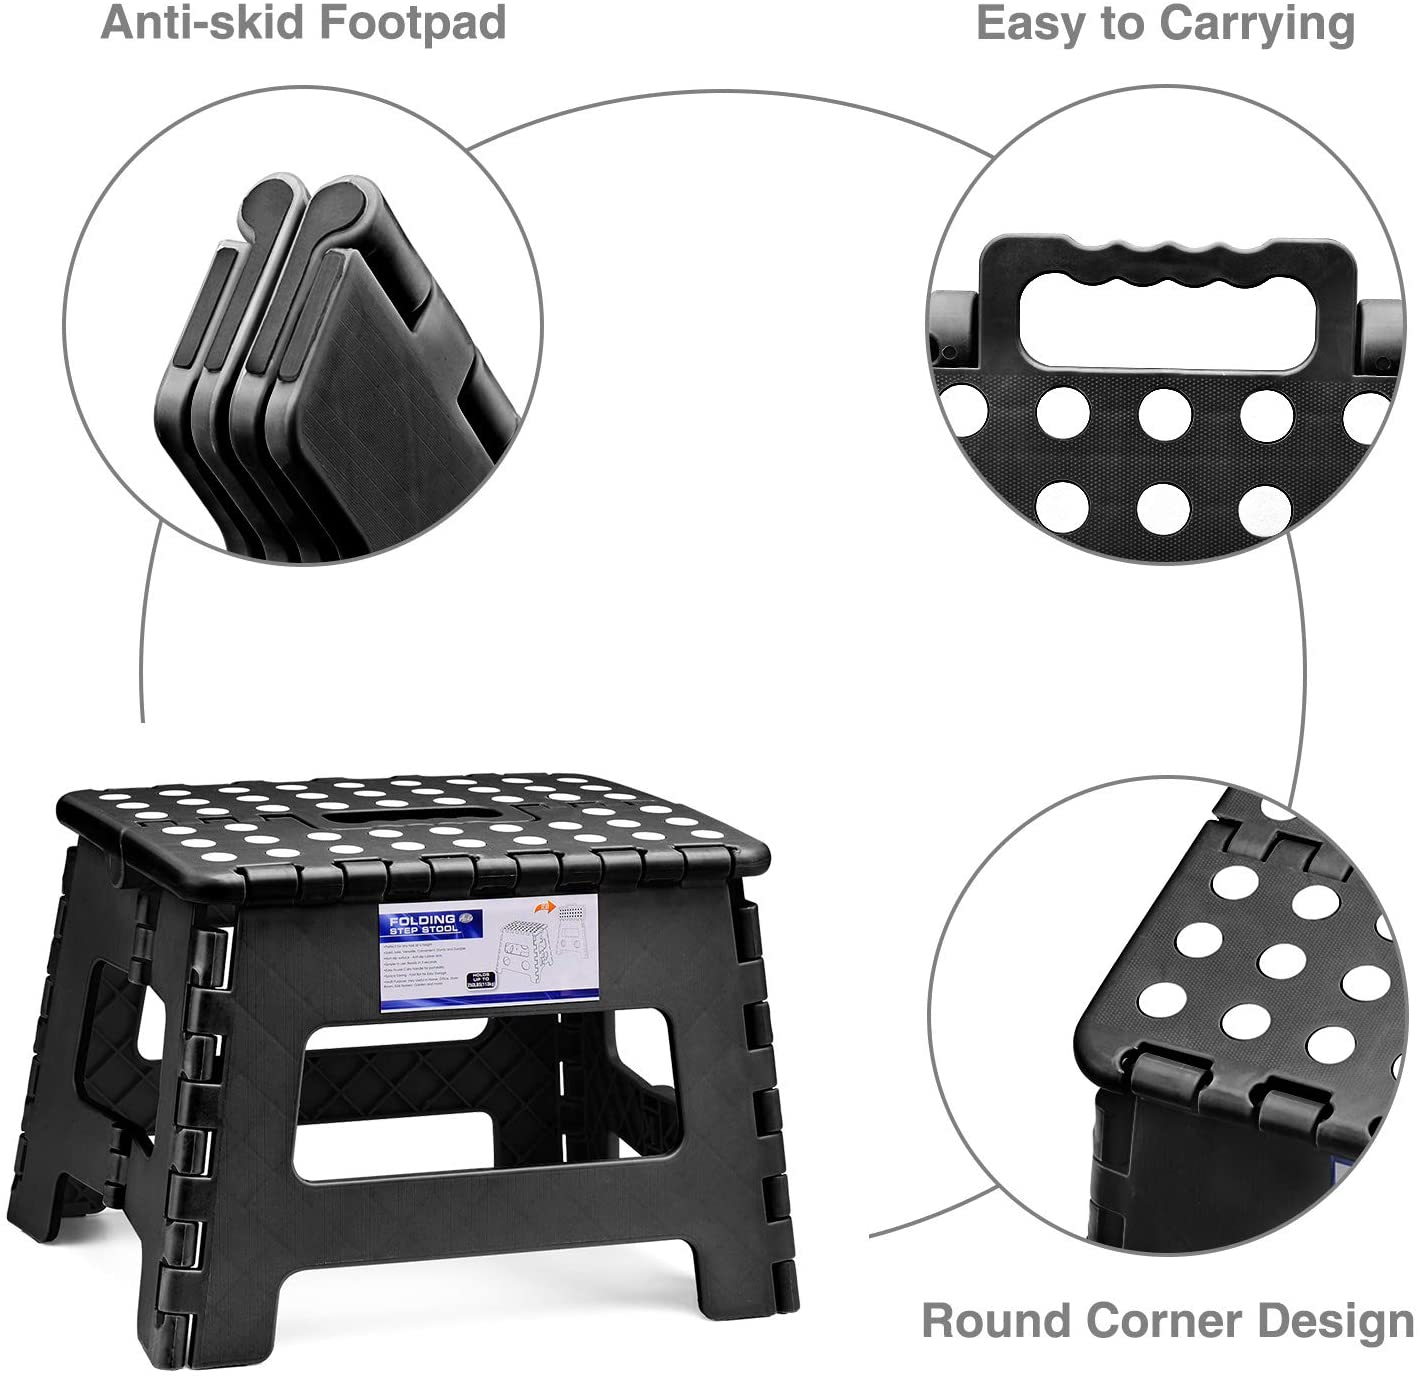 Folding Step Stool 9'' Tall Kids Step Stool Holds up to 300 Lb Plastic Foldable Step Stools for Adults Non-Slip Surface with Carry Handle Collapsible Stool for Home and Outdoor(Black)